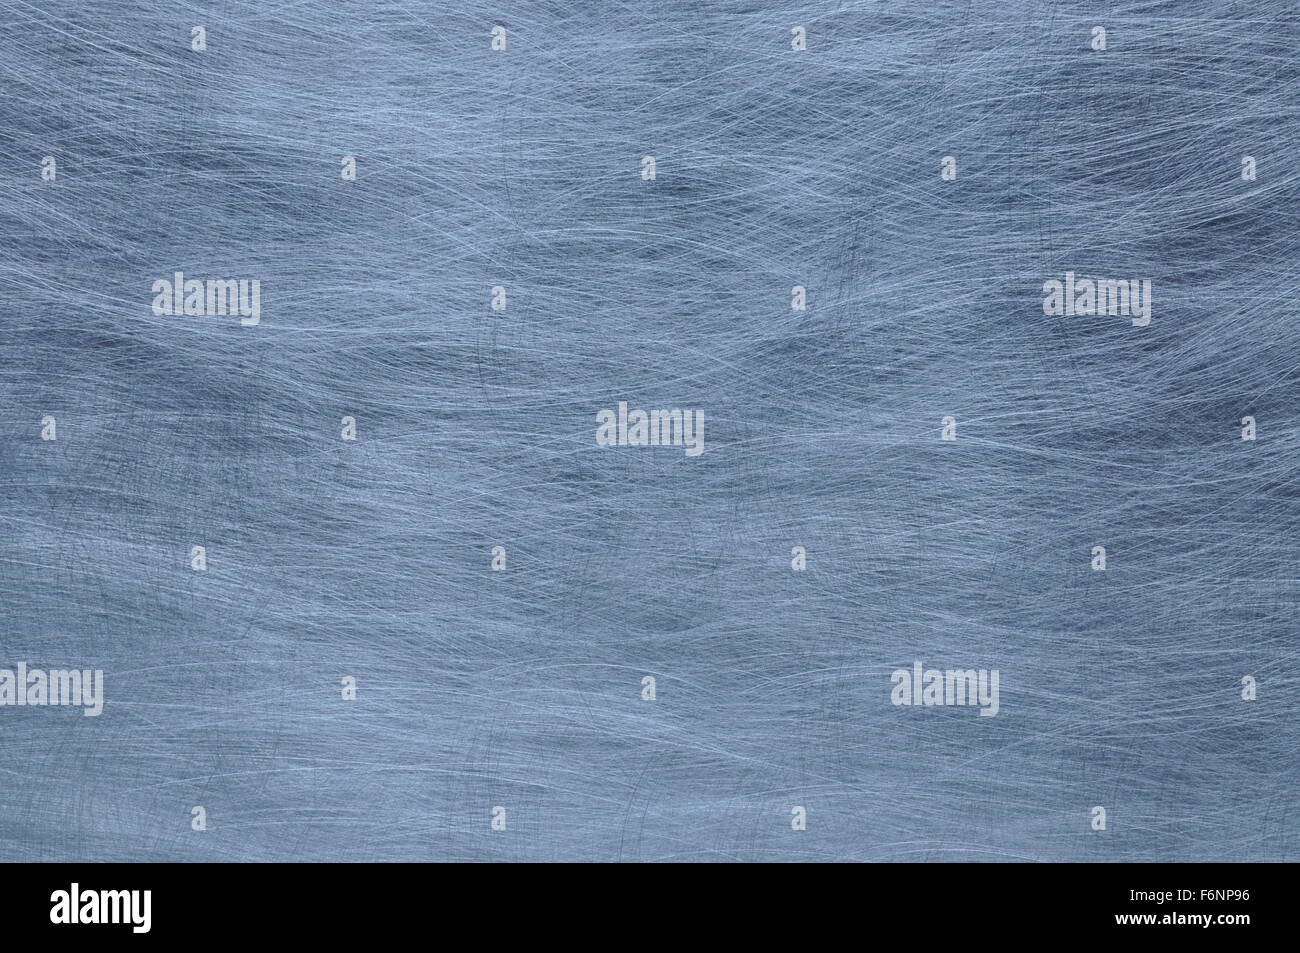 Shiny silver metal background, texture Stock Photo